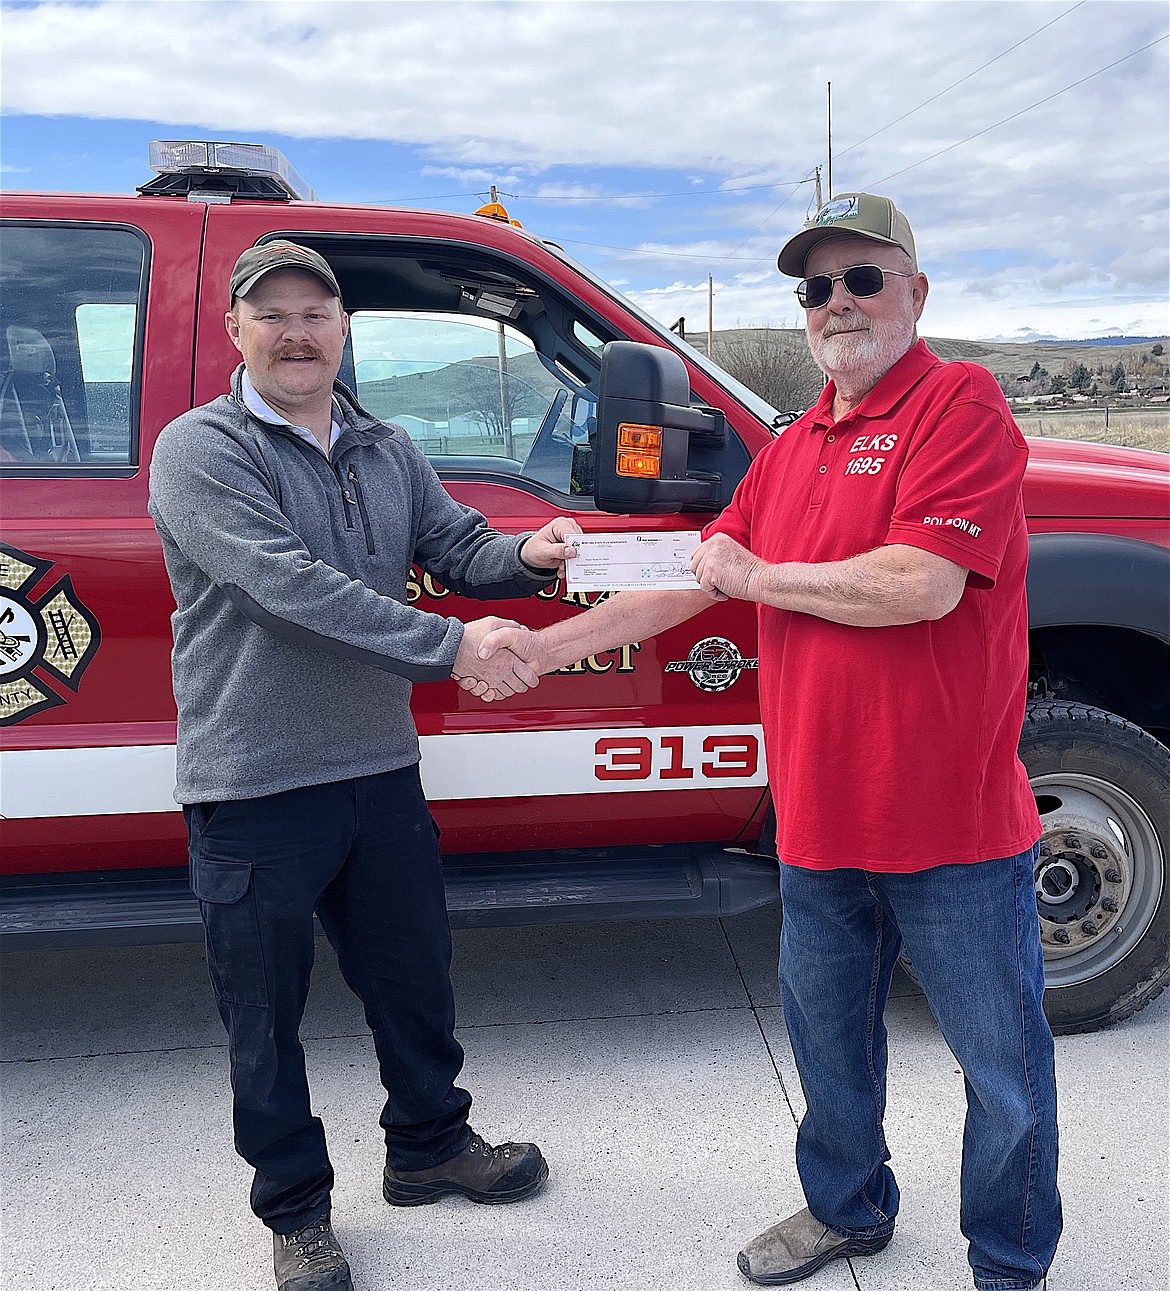 Chief Will Woodger of the Polson Rural Fire District appreciated the infusion his department received recently from Elks, represented by Gail Nelson. (Courtesy photo)